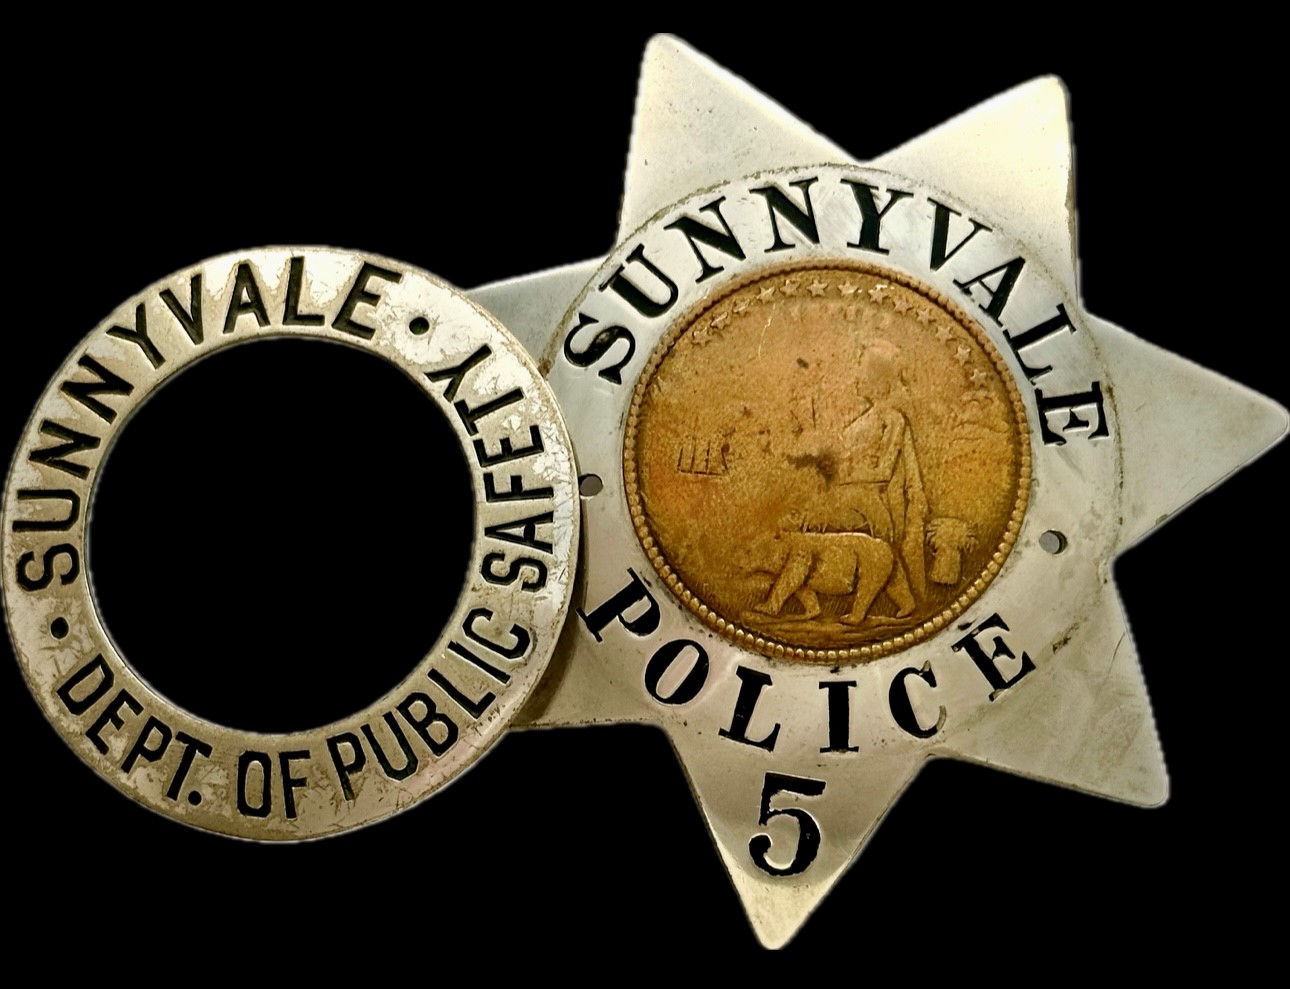 Sunnyvale police badge 5 showing the Dept. of Public Safety ring that was added to the badge when the department changed.  Hallmarked  Patrick and M. K. Co. San Francisco.  Circa 1950.